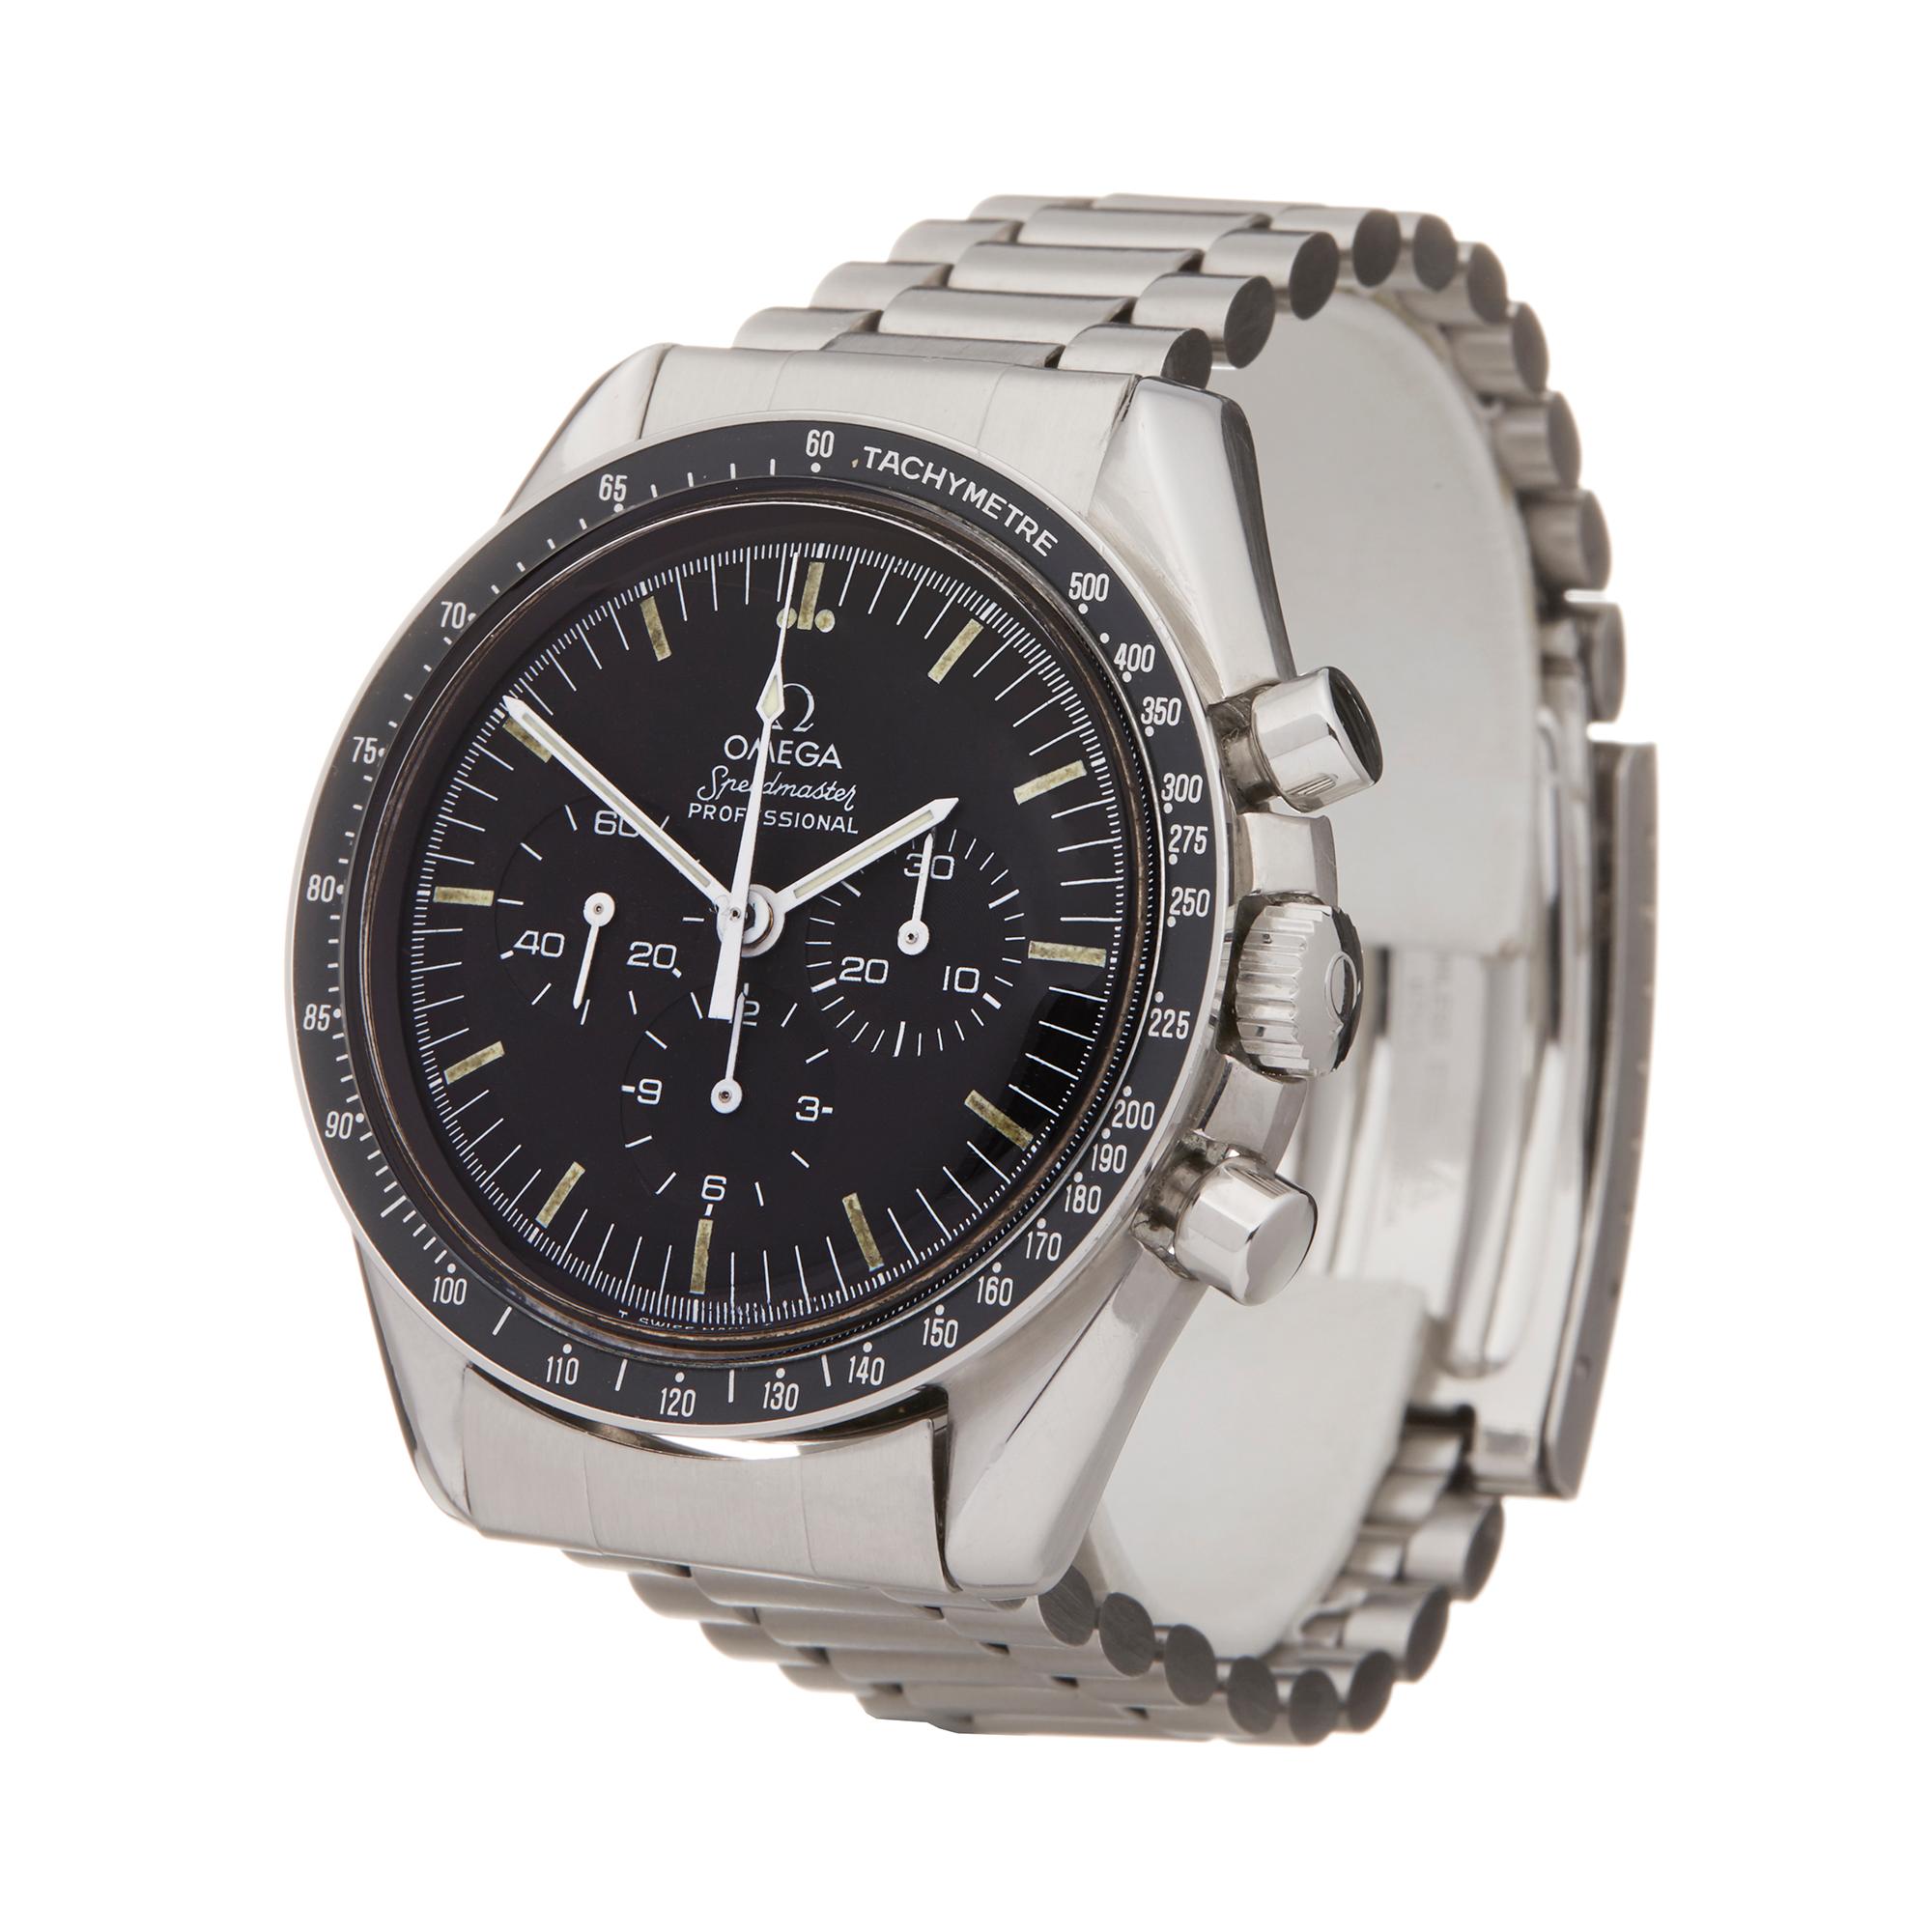 Ref: COM2190
Manufacturer: Omega
Model: Speedmaster
Model Ref: 145.022.76ST
Age: Circa 1977
Gender: Mens
Complete With: Xupes Presentation Box
Dial: Black Baton
Glass: Plexiglass
Movement: Mechanical Wind
Water Resistance: Not Recommended for Use in